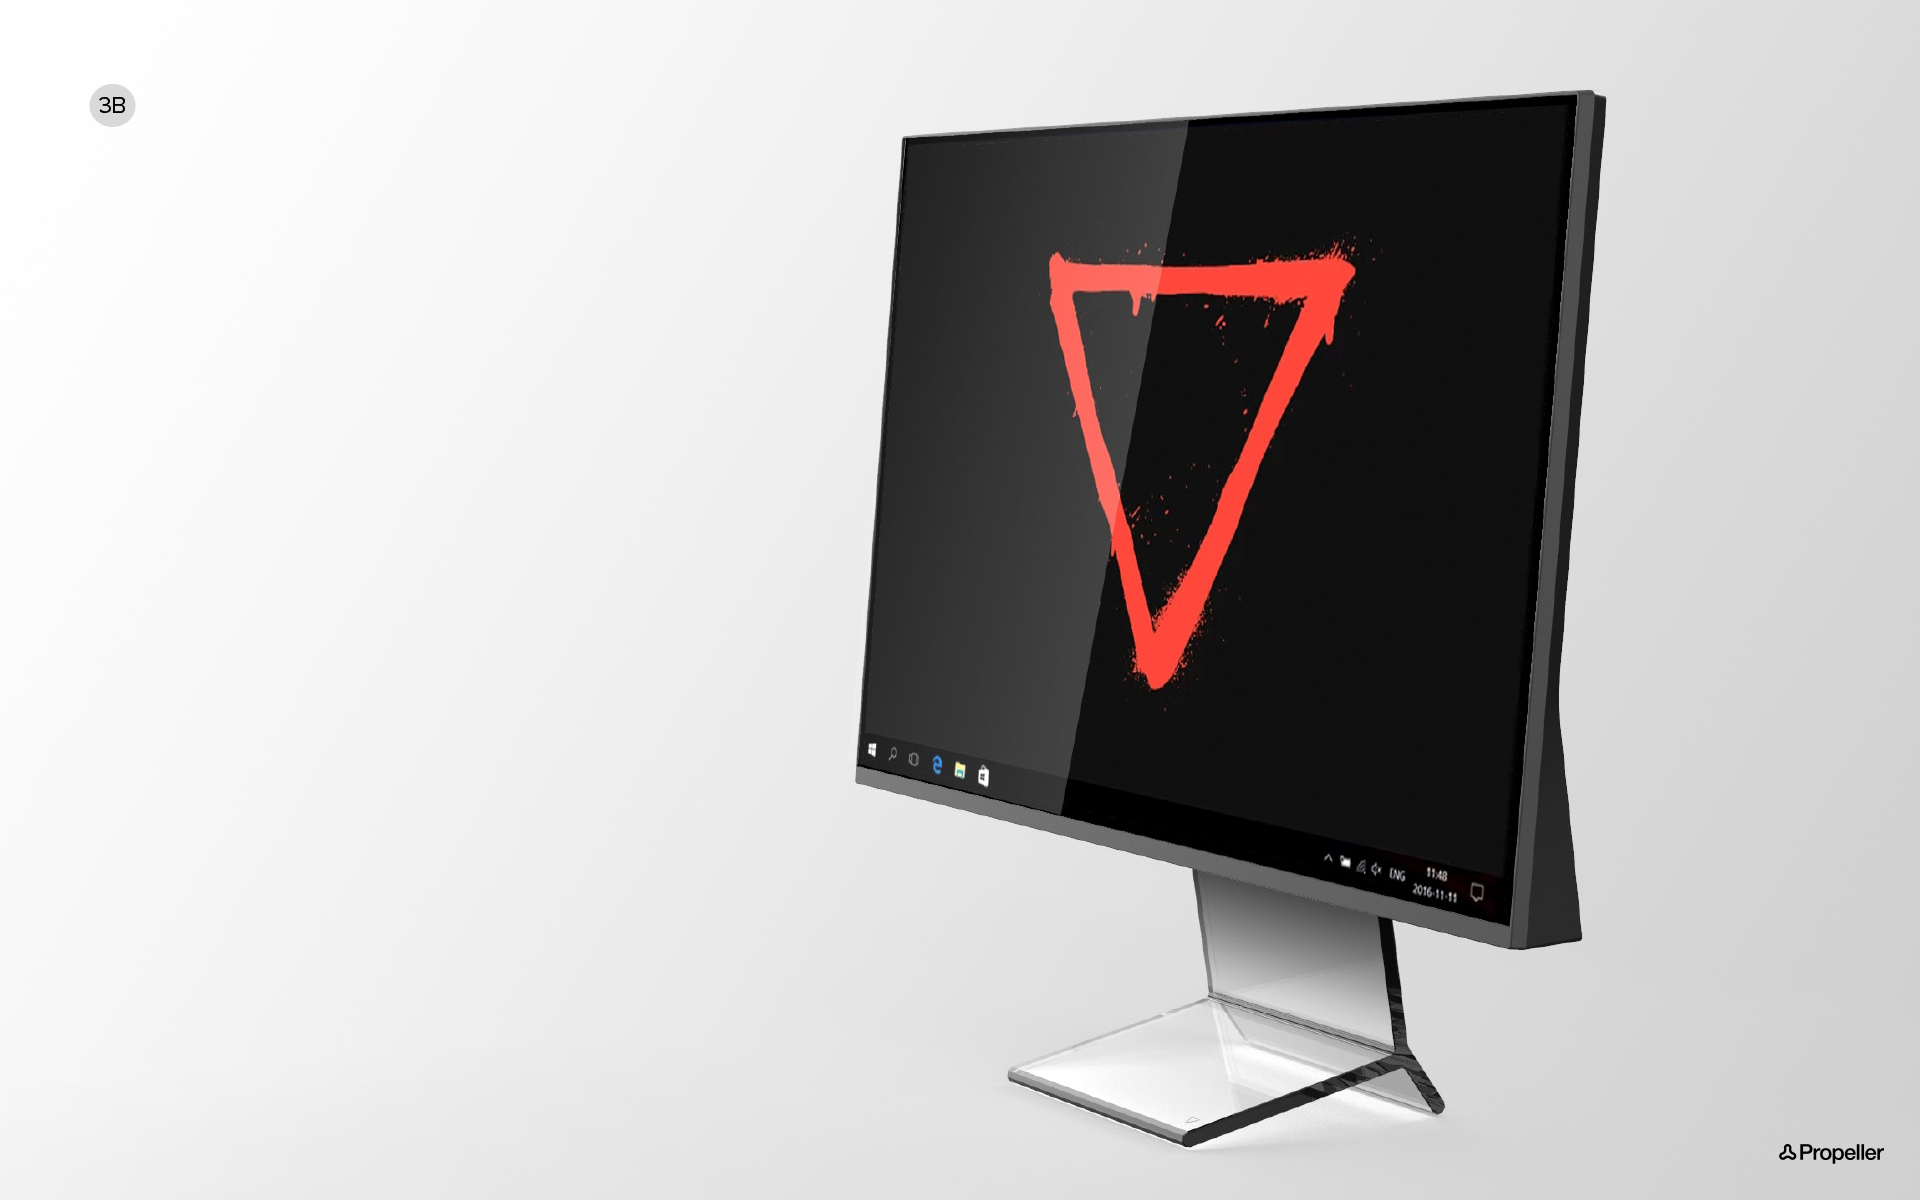 AOC Unleashes a Whopping Five Gaming Monitors Sporting 240Hz